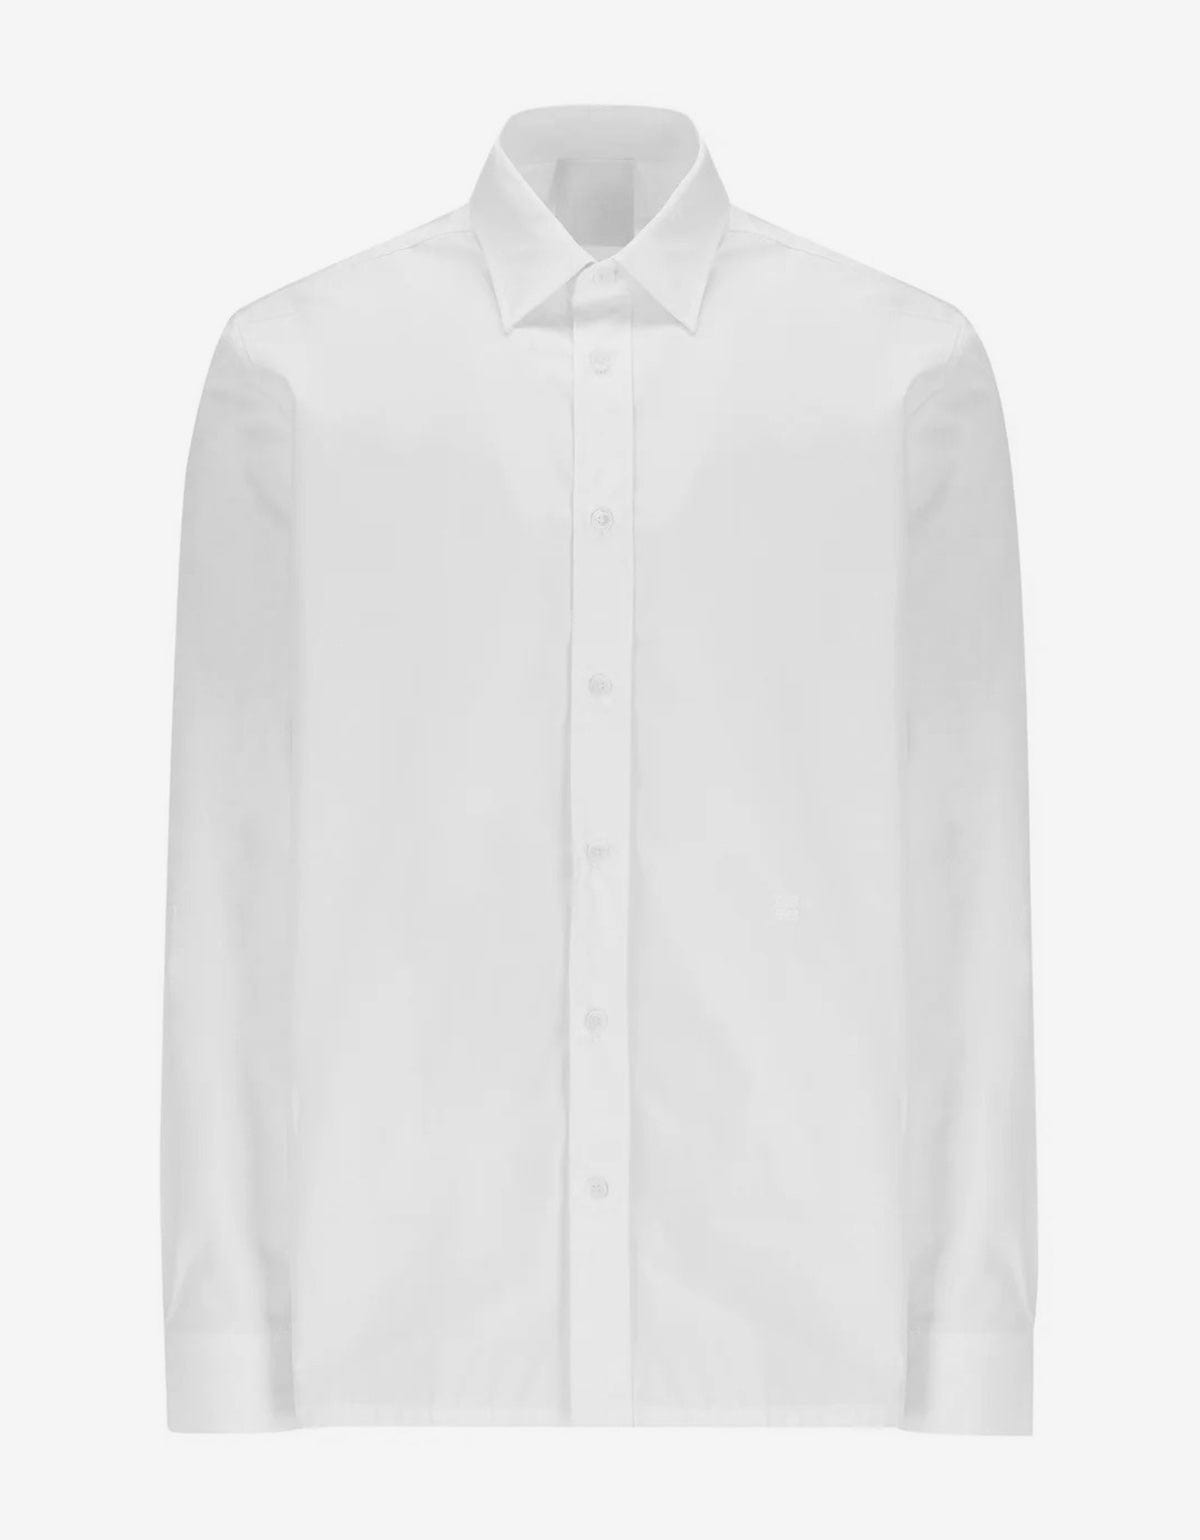 Givenchy White Classic Shirt